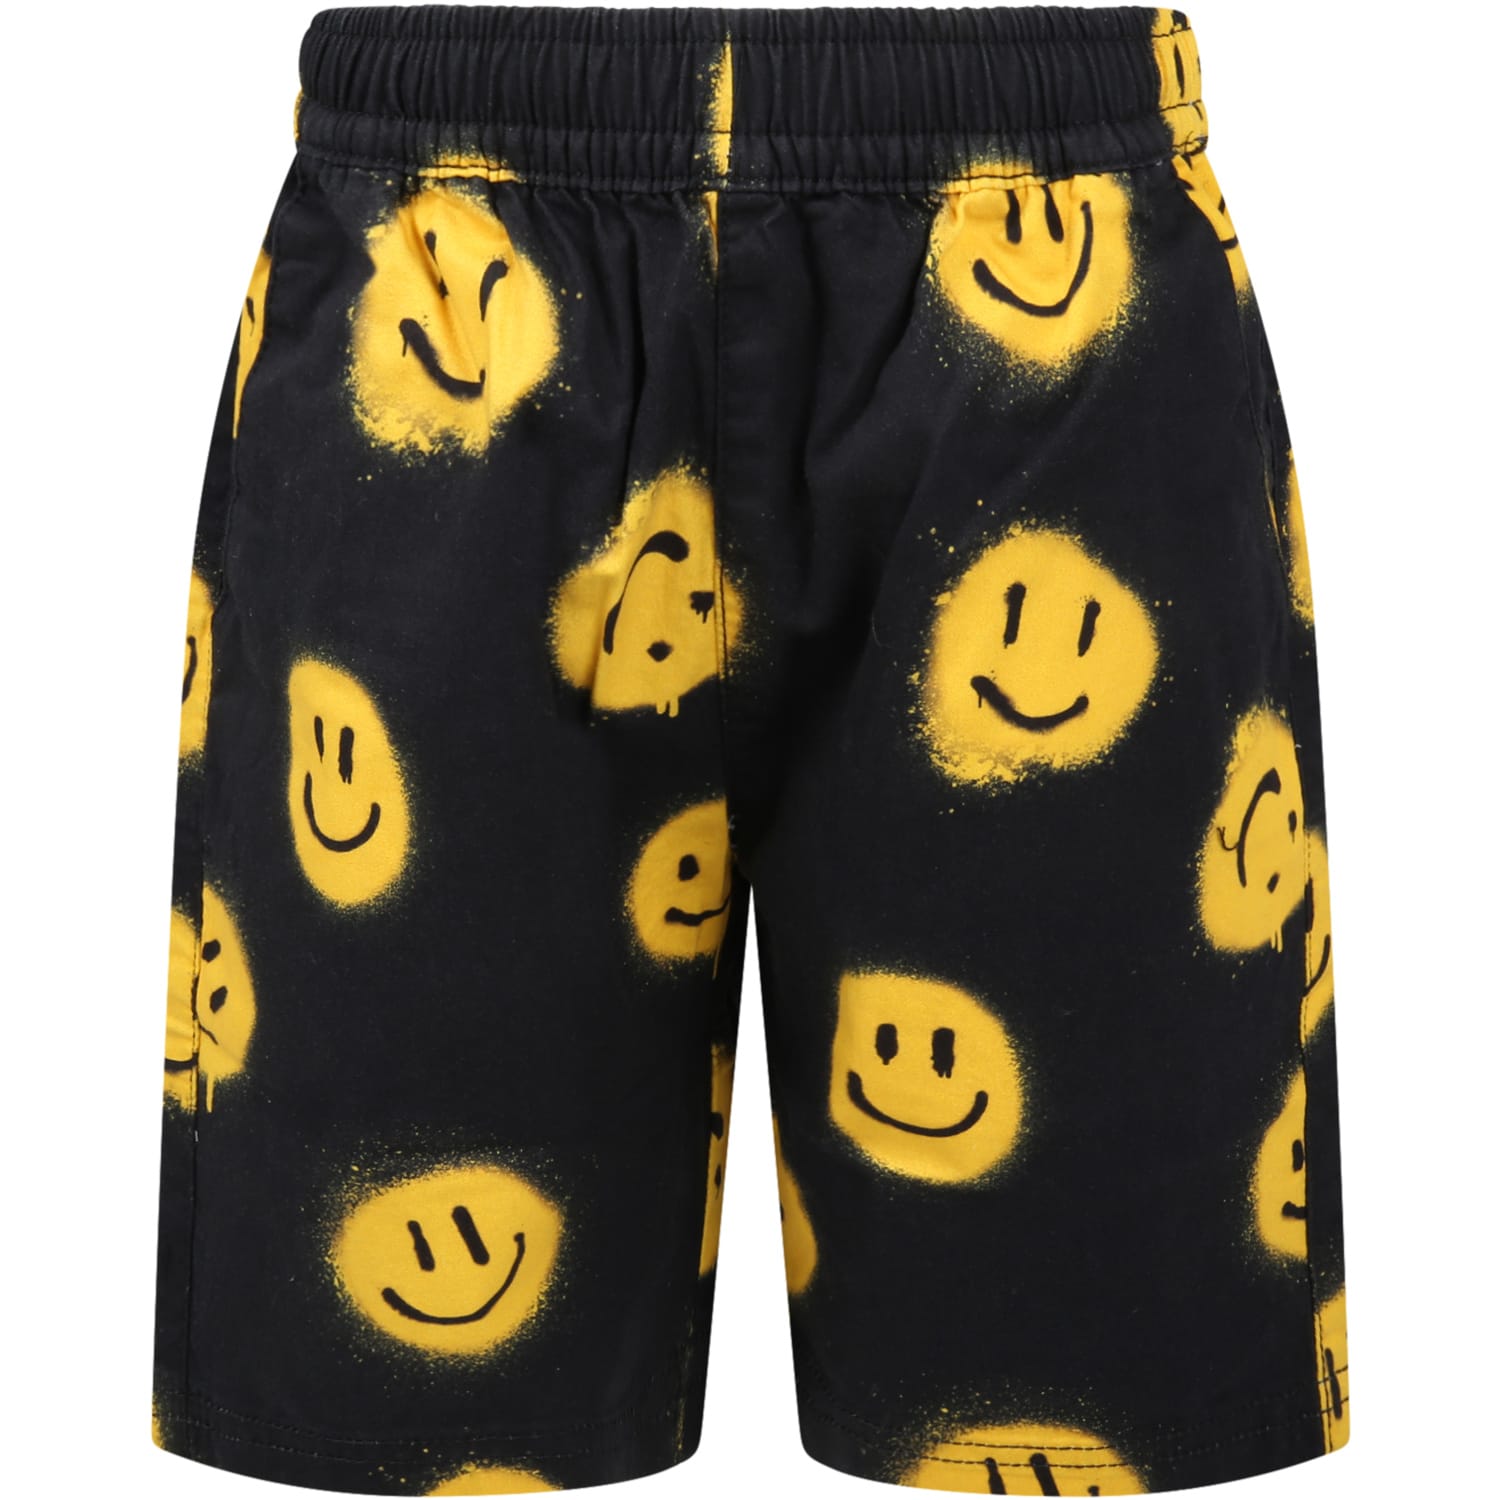 Molo Black Short For Boy With Smileys